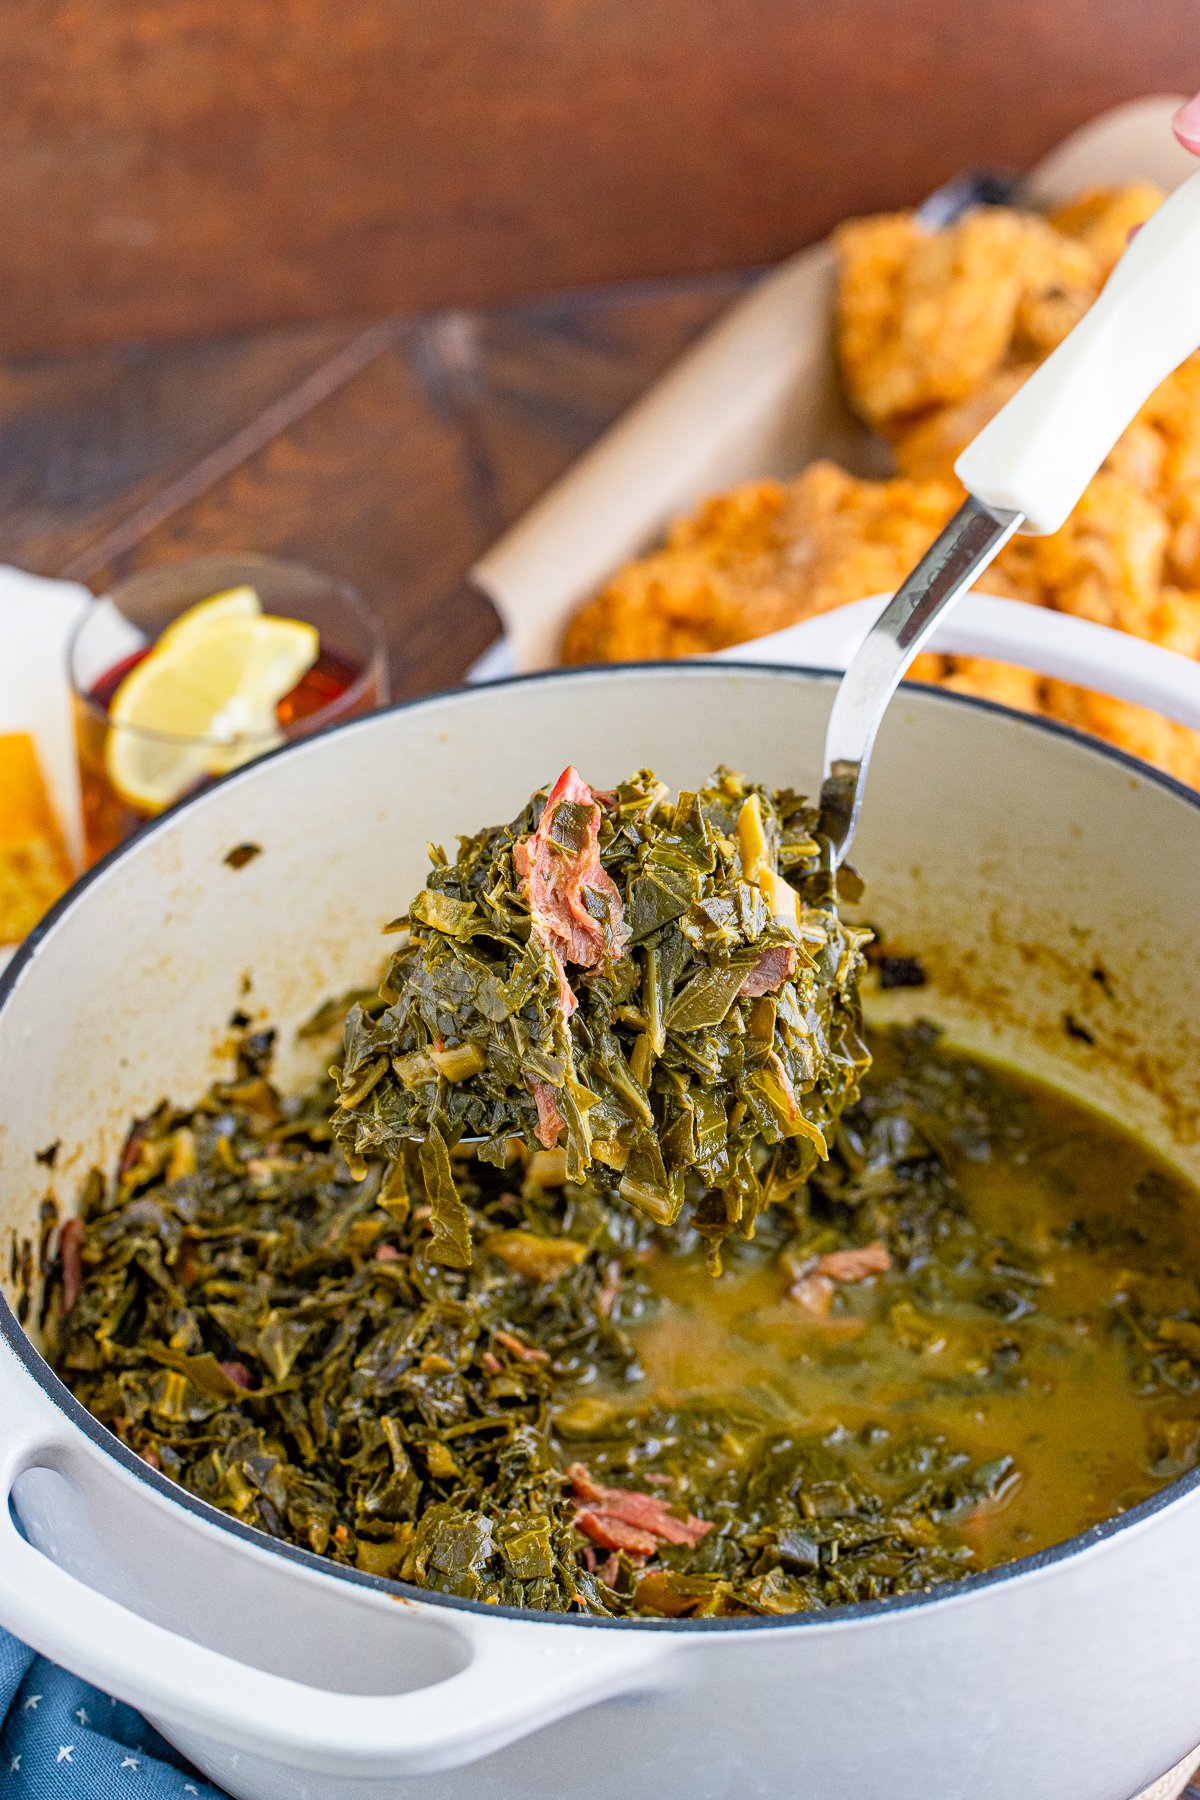 Ladle holding up some of the Southern Collard Greens from pan.